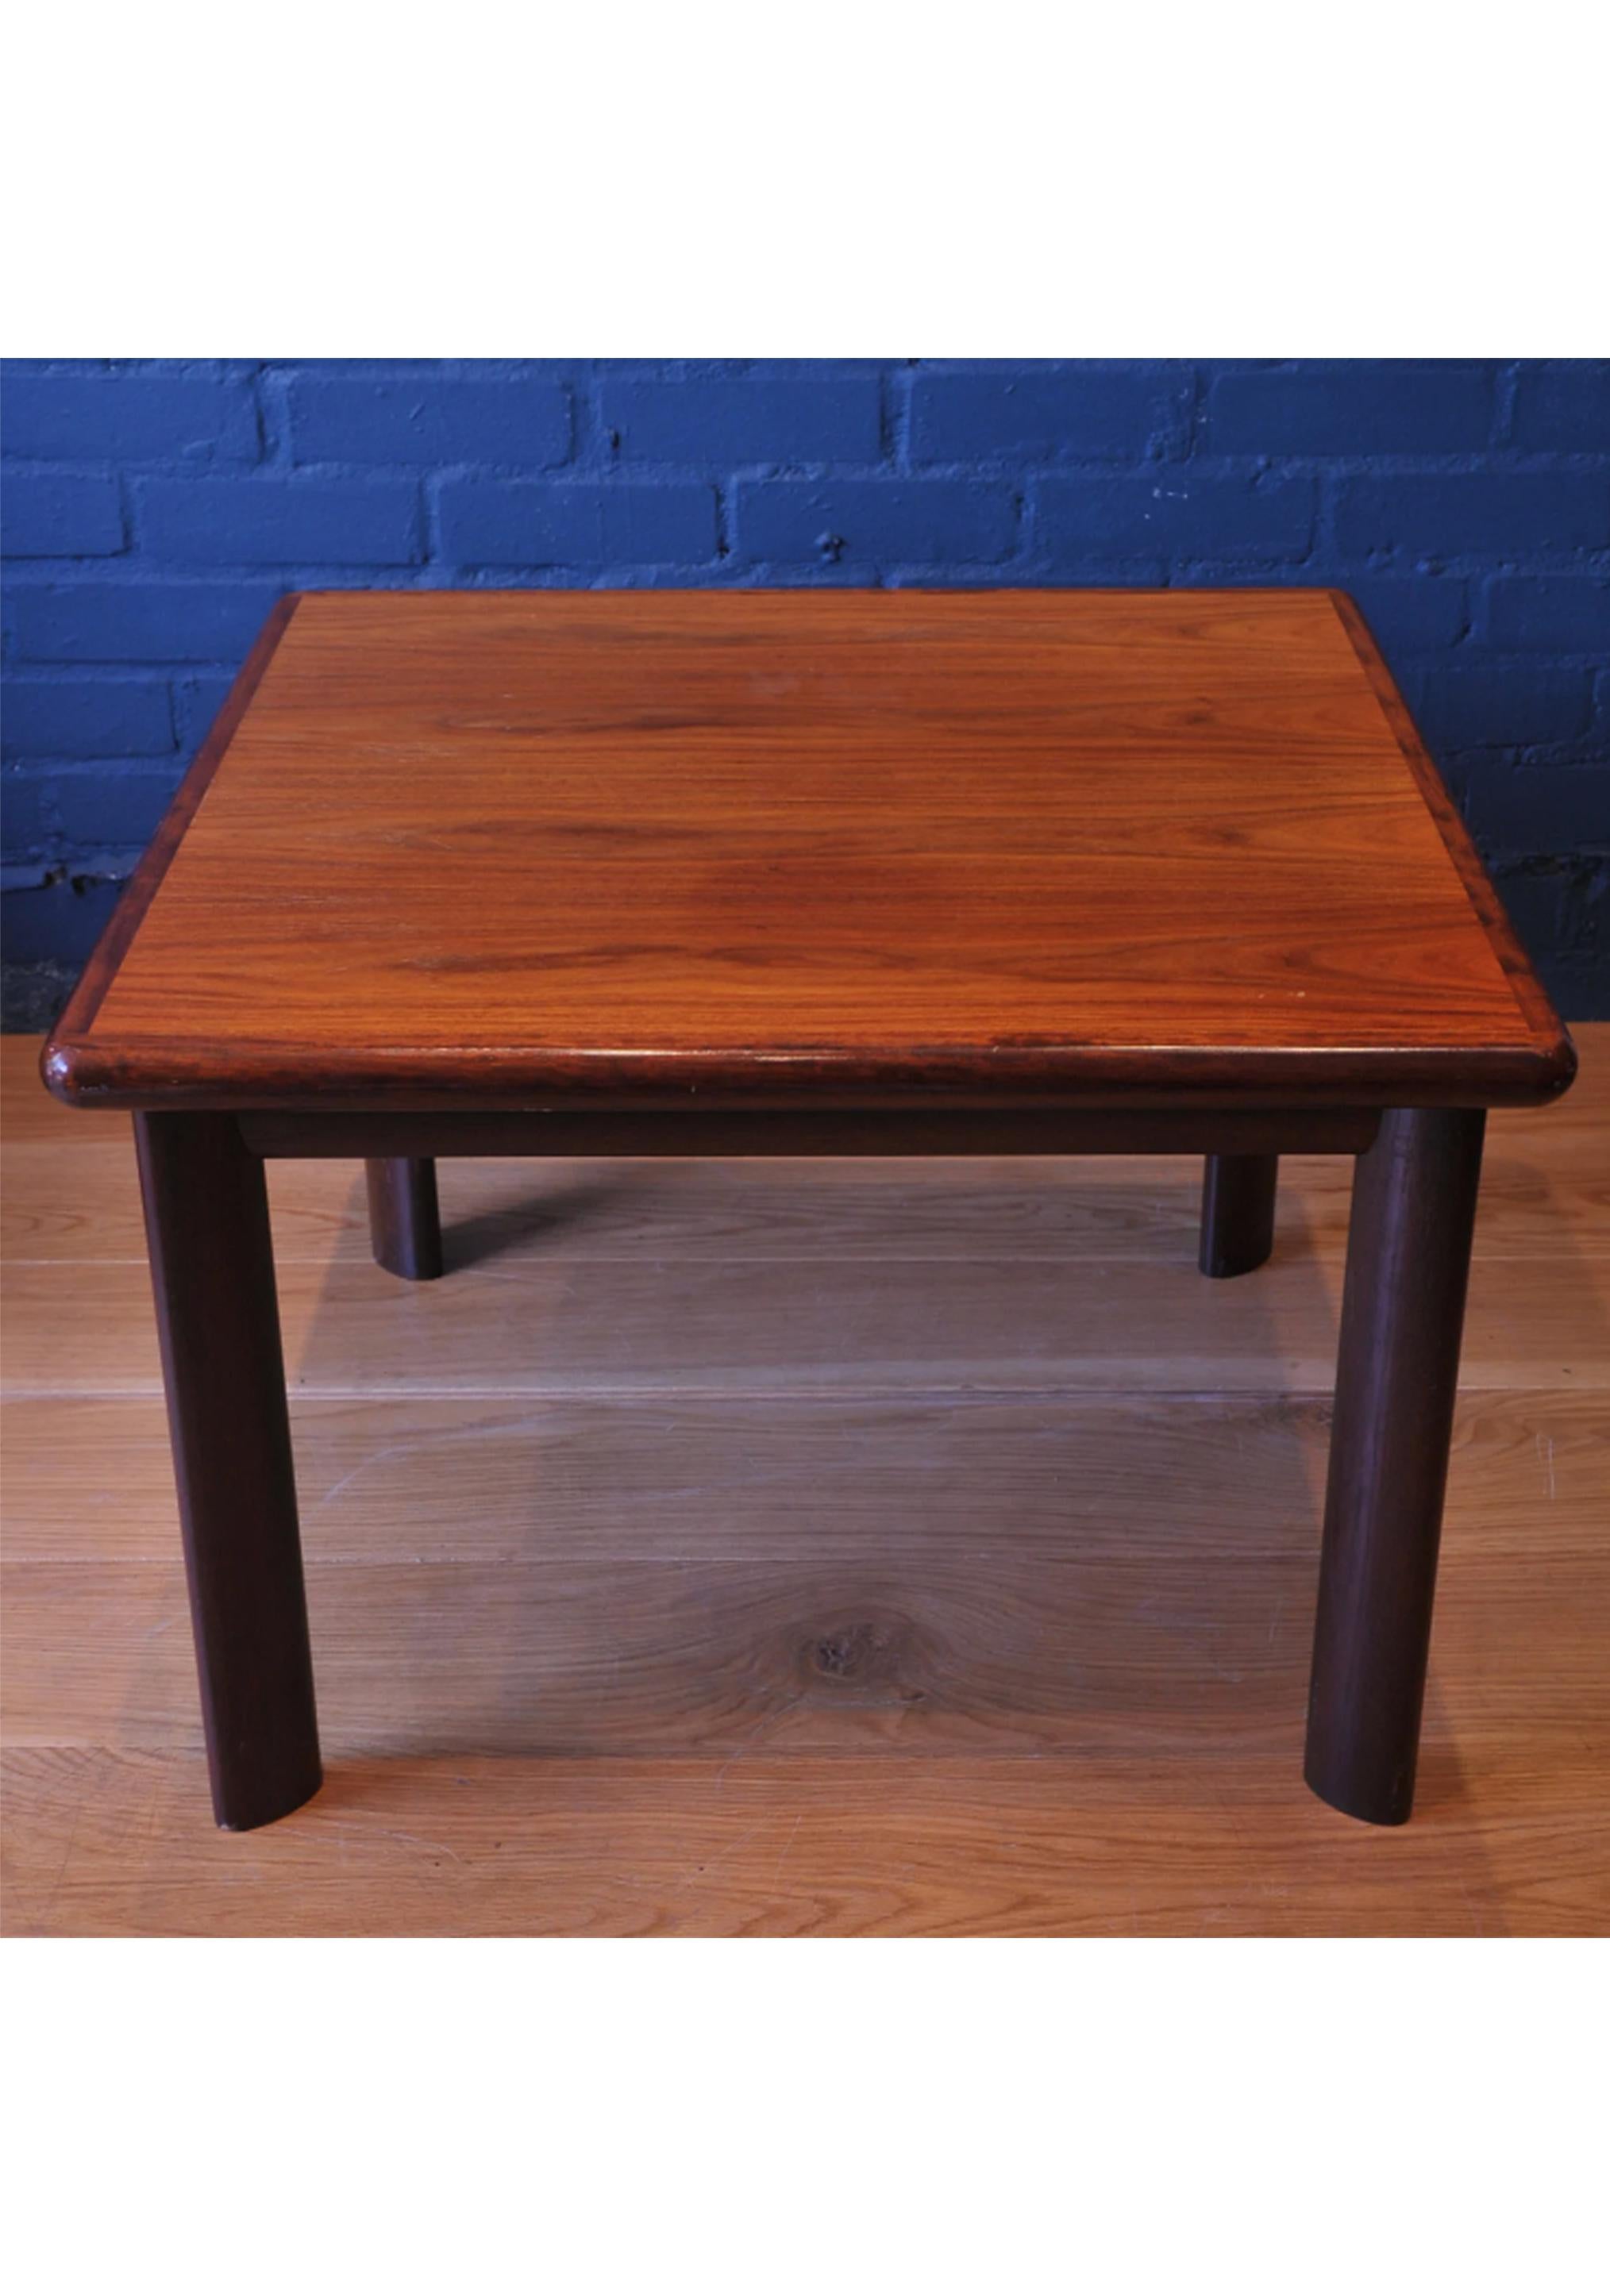 Mid-Century Modern Dyrlund Rosewood & Teak Square Coffee Table Mid Century Made in Denmark 1970s For Sale